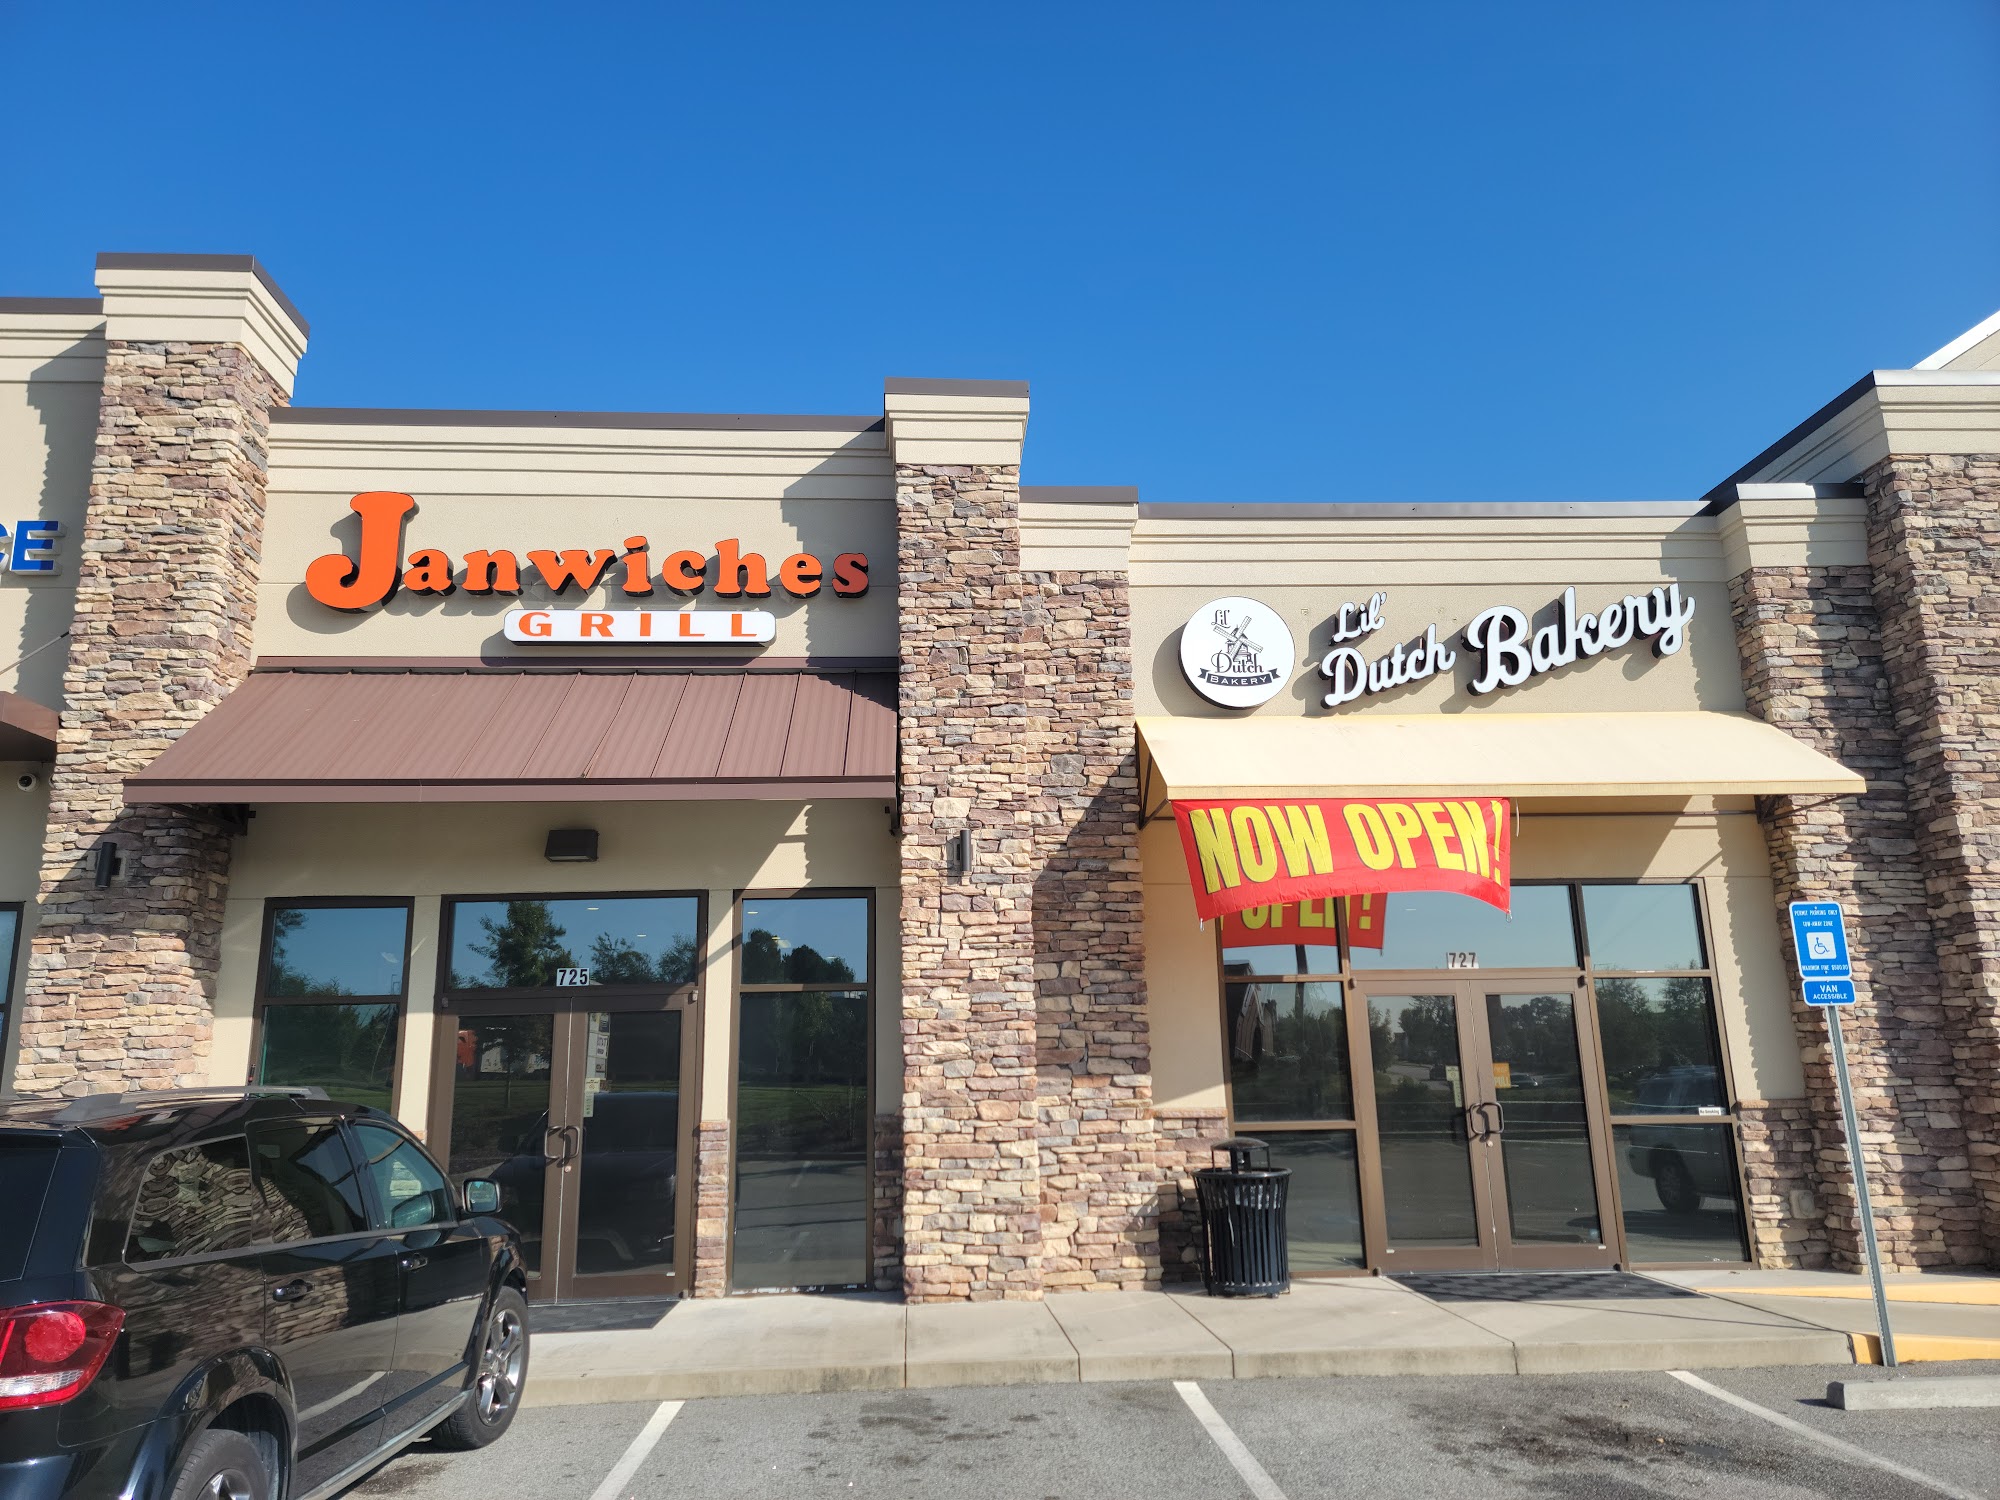 Janwiches Grill